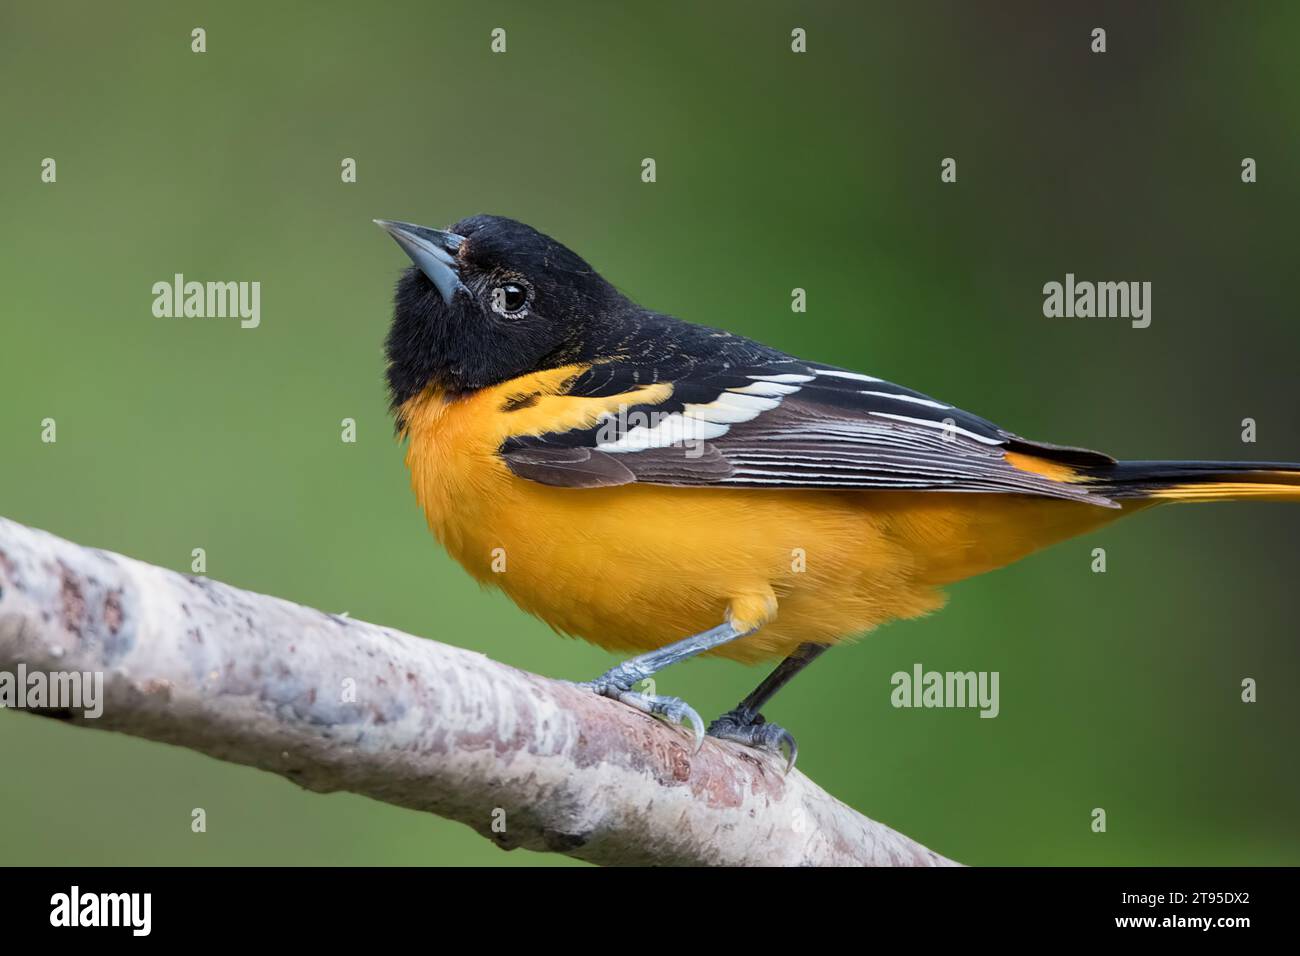 Close up Male Baltimore Oriole (Icterus galbula) perched on Birch tree branch in the Chippewa National Forest, northern Minnesota USA Stock Photo